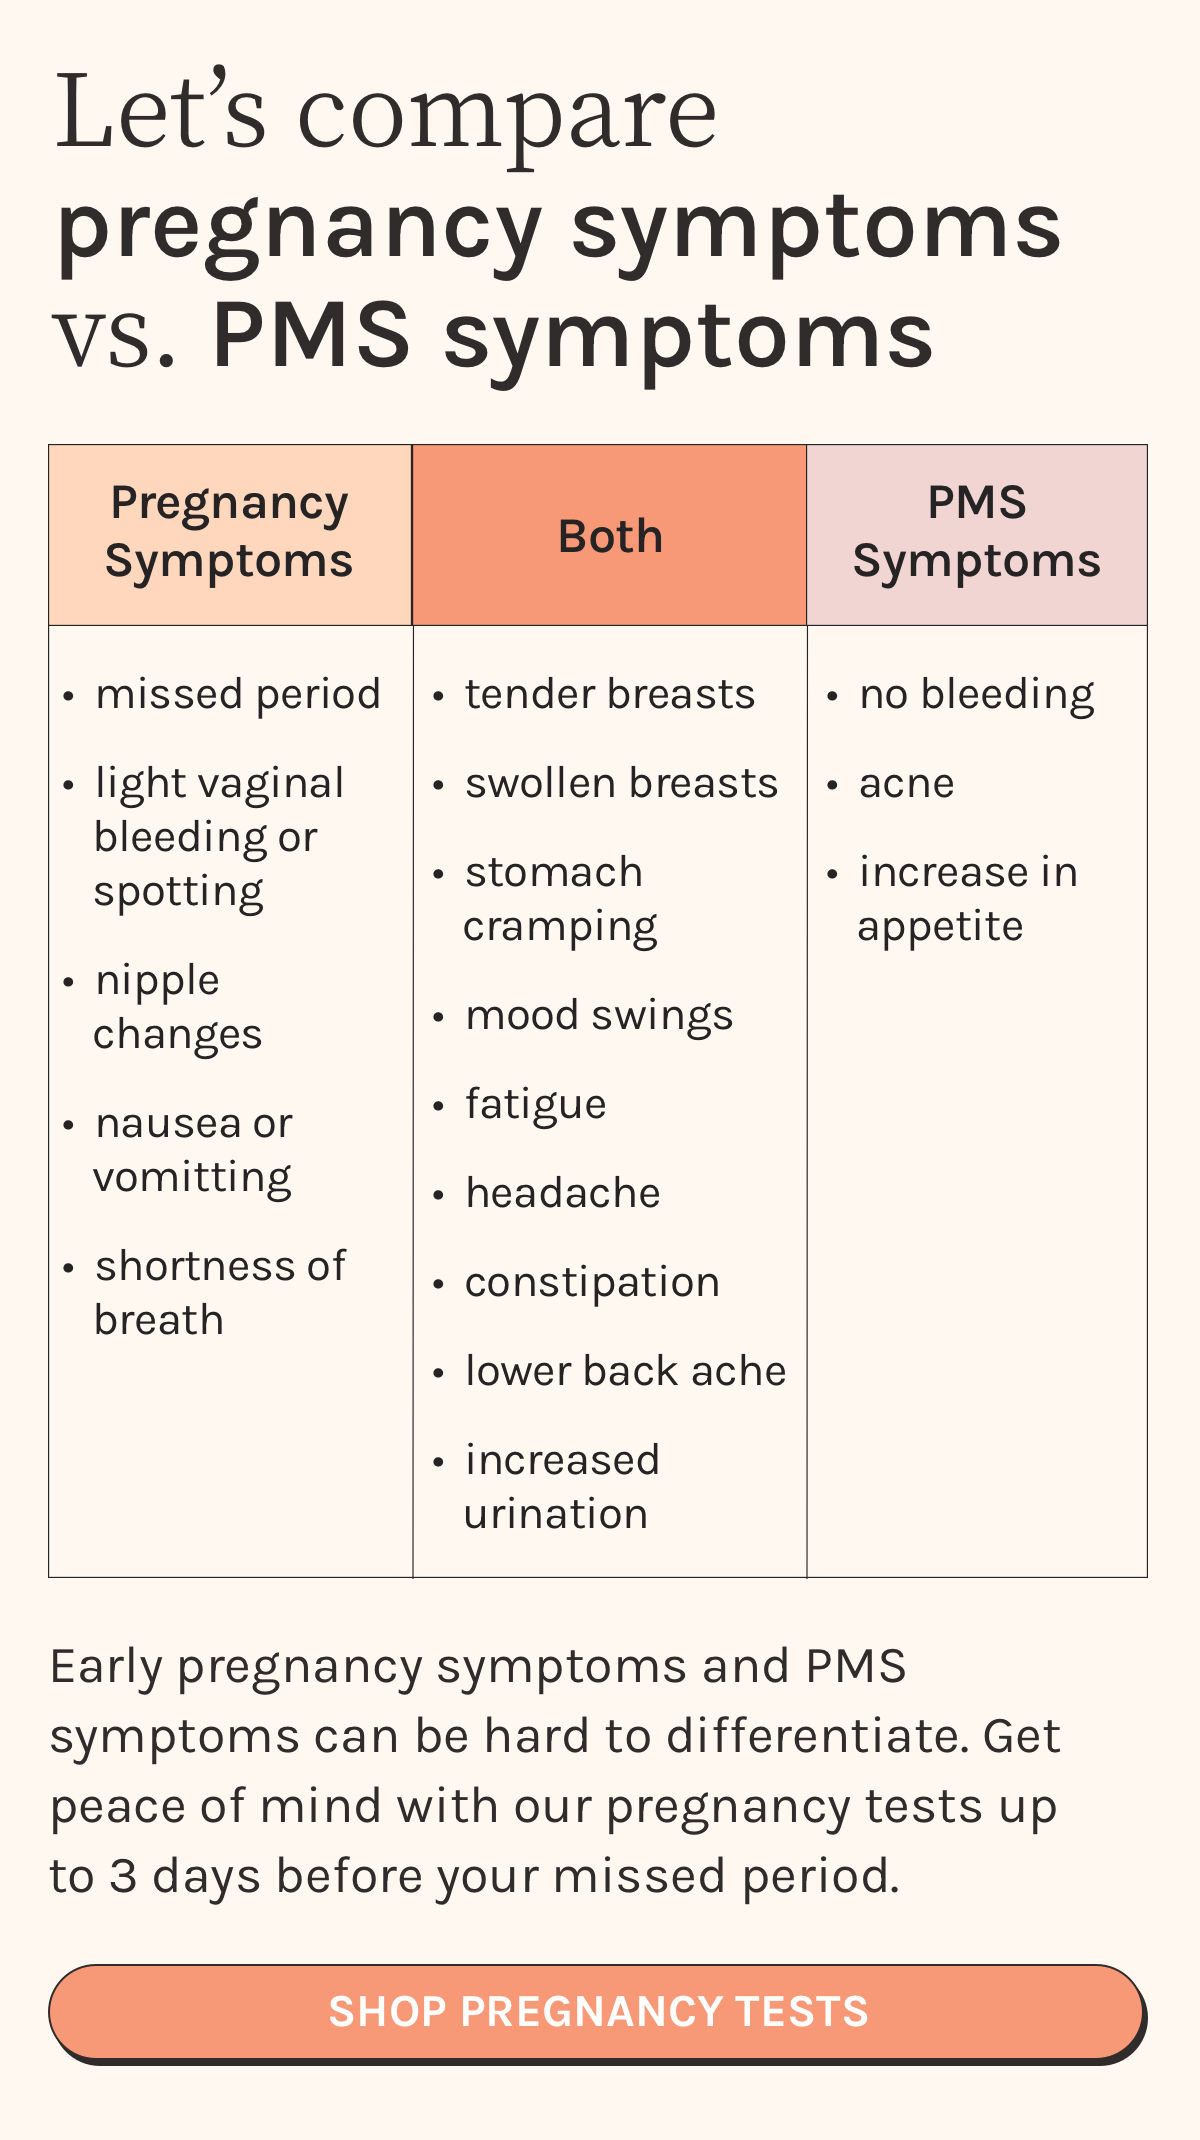 Stix: Pregnancy and PMS symptoms are more similar than you think